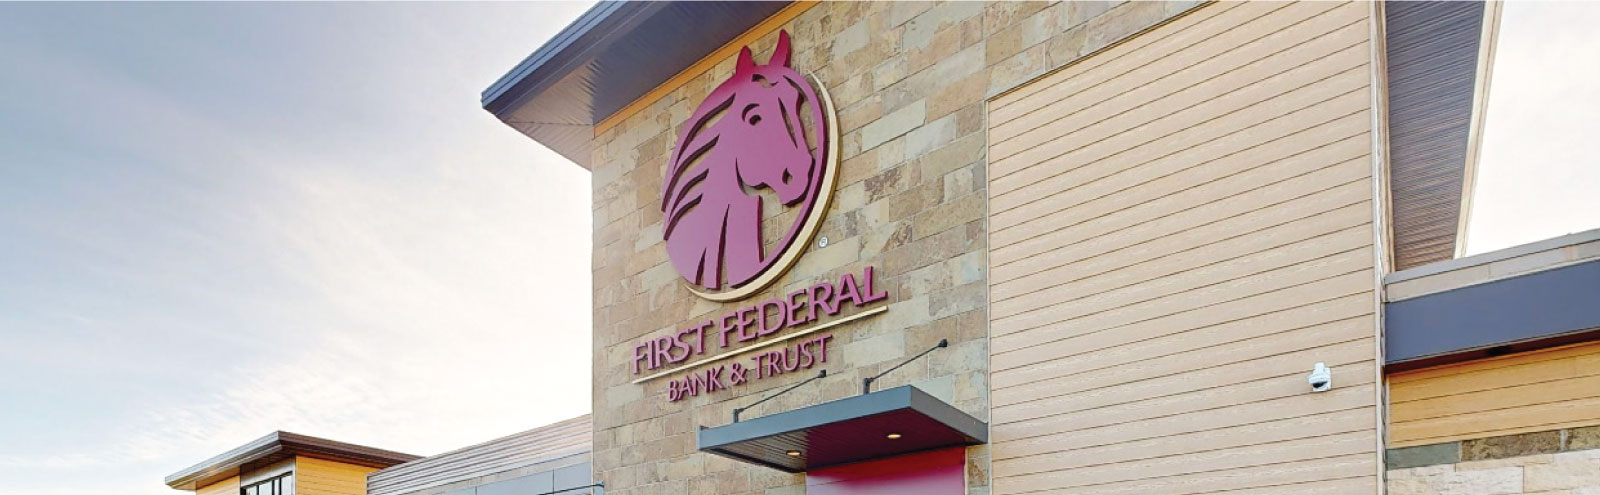 Exterior of the First Federal logo on the Billings branch building